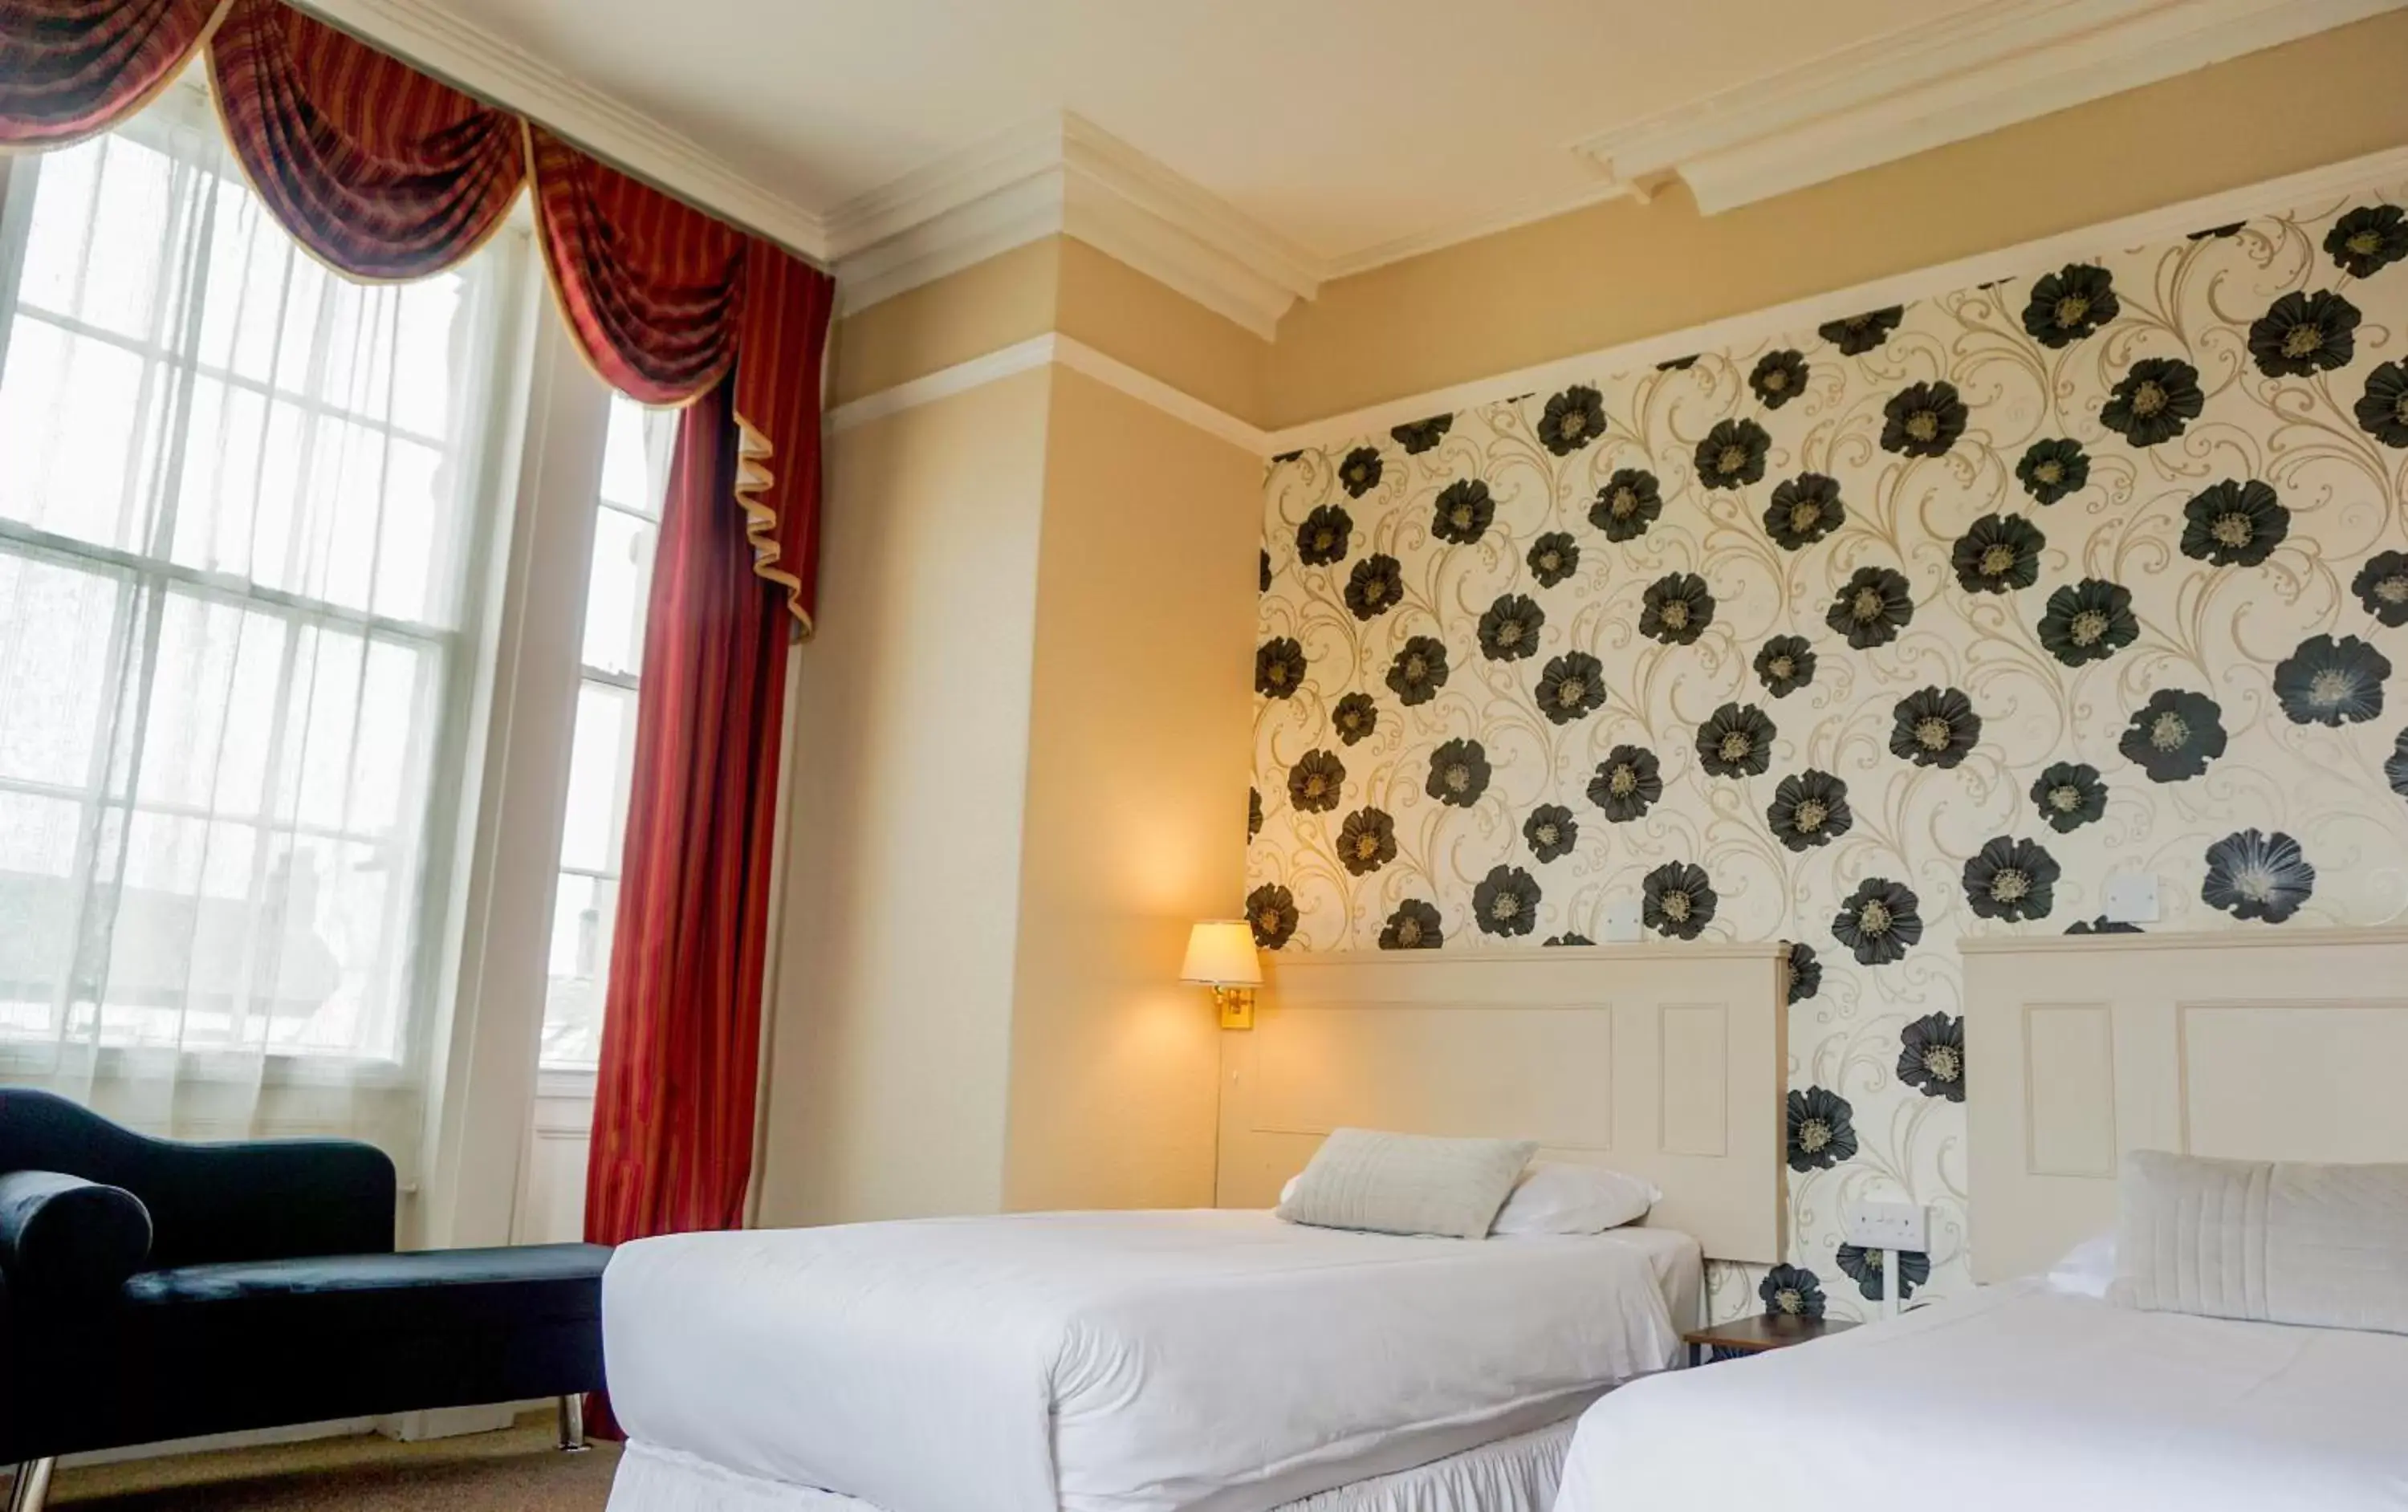 Bed in Manor House Hotel, Cockermouth